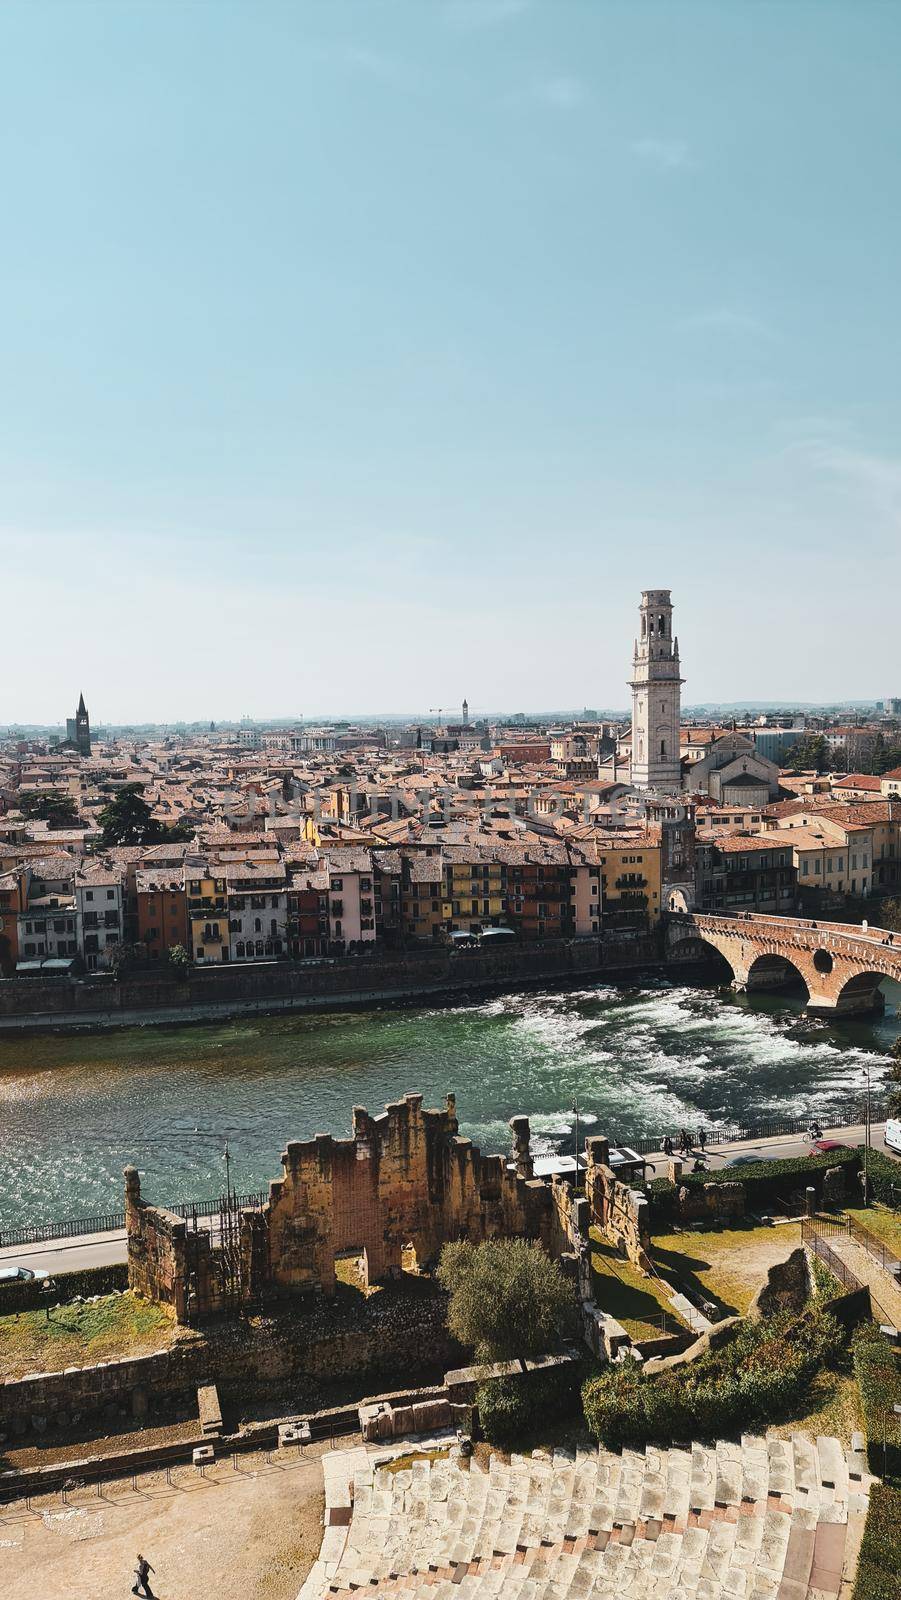 Verona, Italy-March 19, 2022: Beautifull old buildings of Verona. Typical architecture of the medieval period. Aerial view to the city with blue sky in the background. Detailed photography of the old architecture.